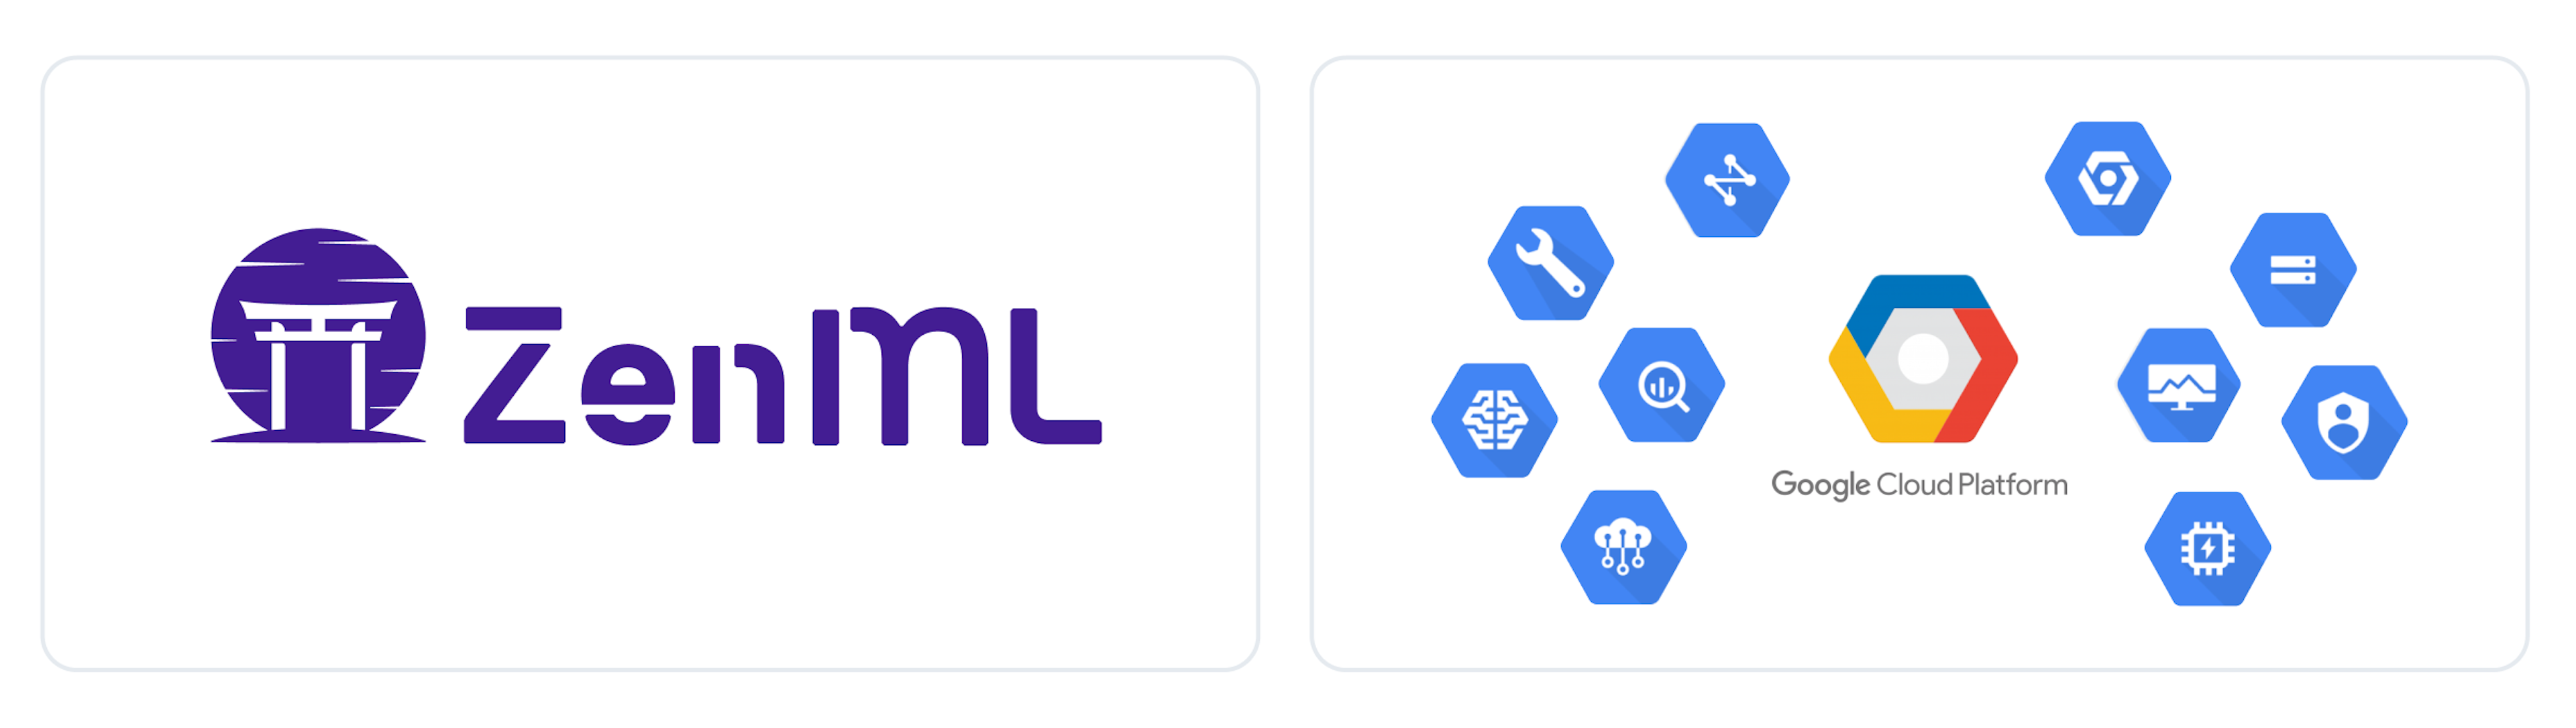 Zenml: open-source MLOps framework for creating portable, production-ready machine learning pipelines & AutoMLOps: a service that generates, provisions, and deploys CI/CD integrated MLOps pipelines, bridging the gap between Data Science and DevOps